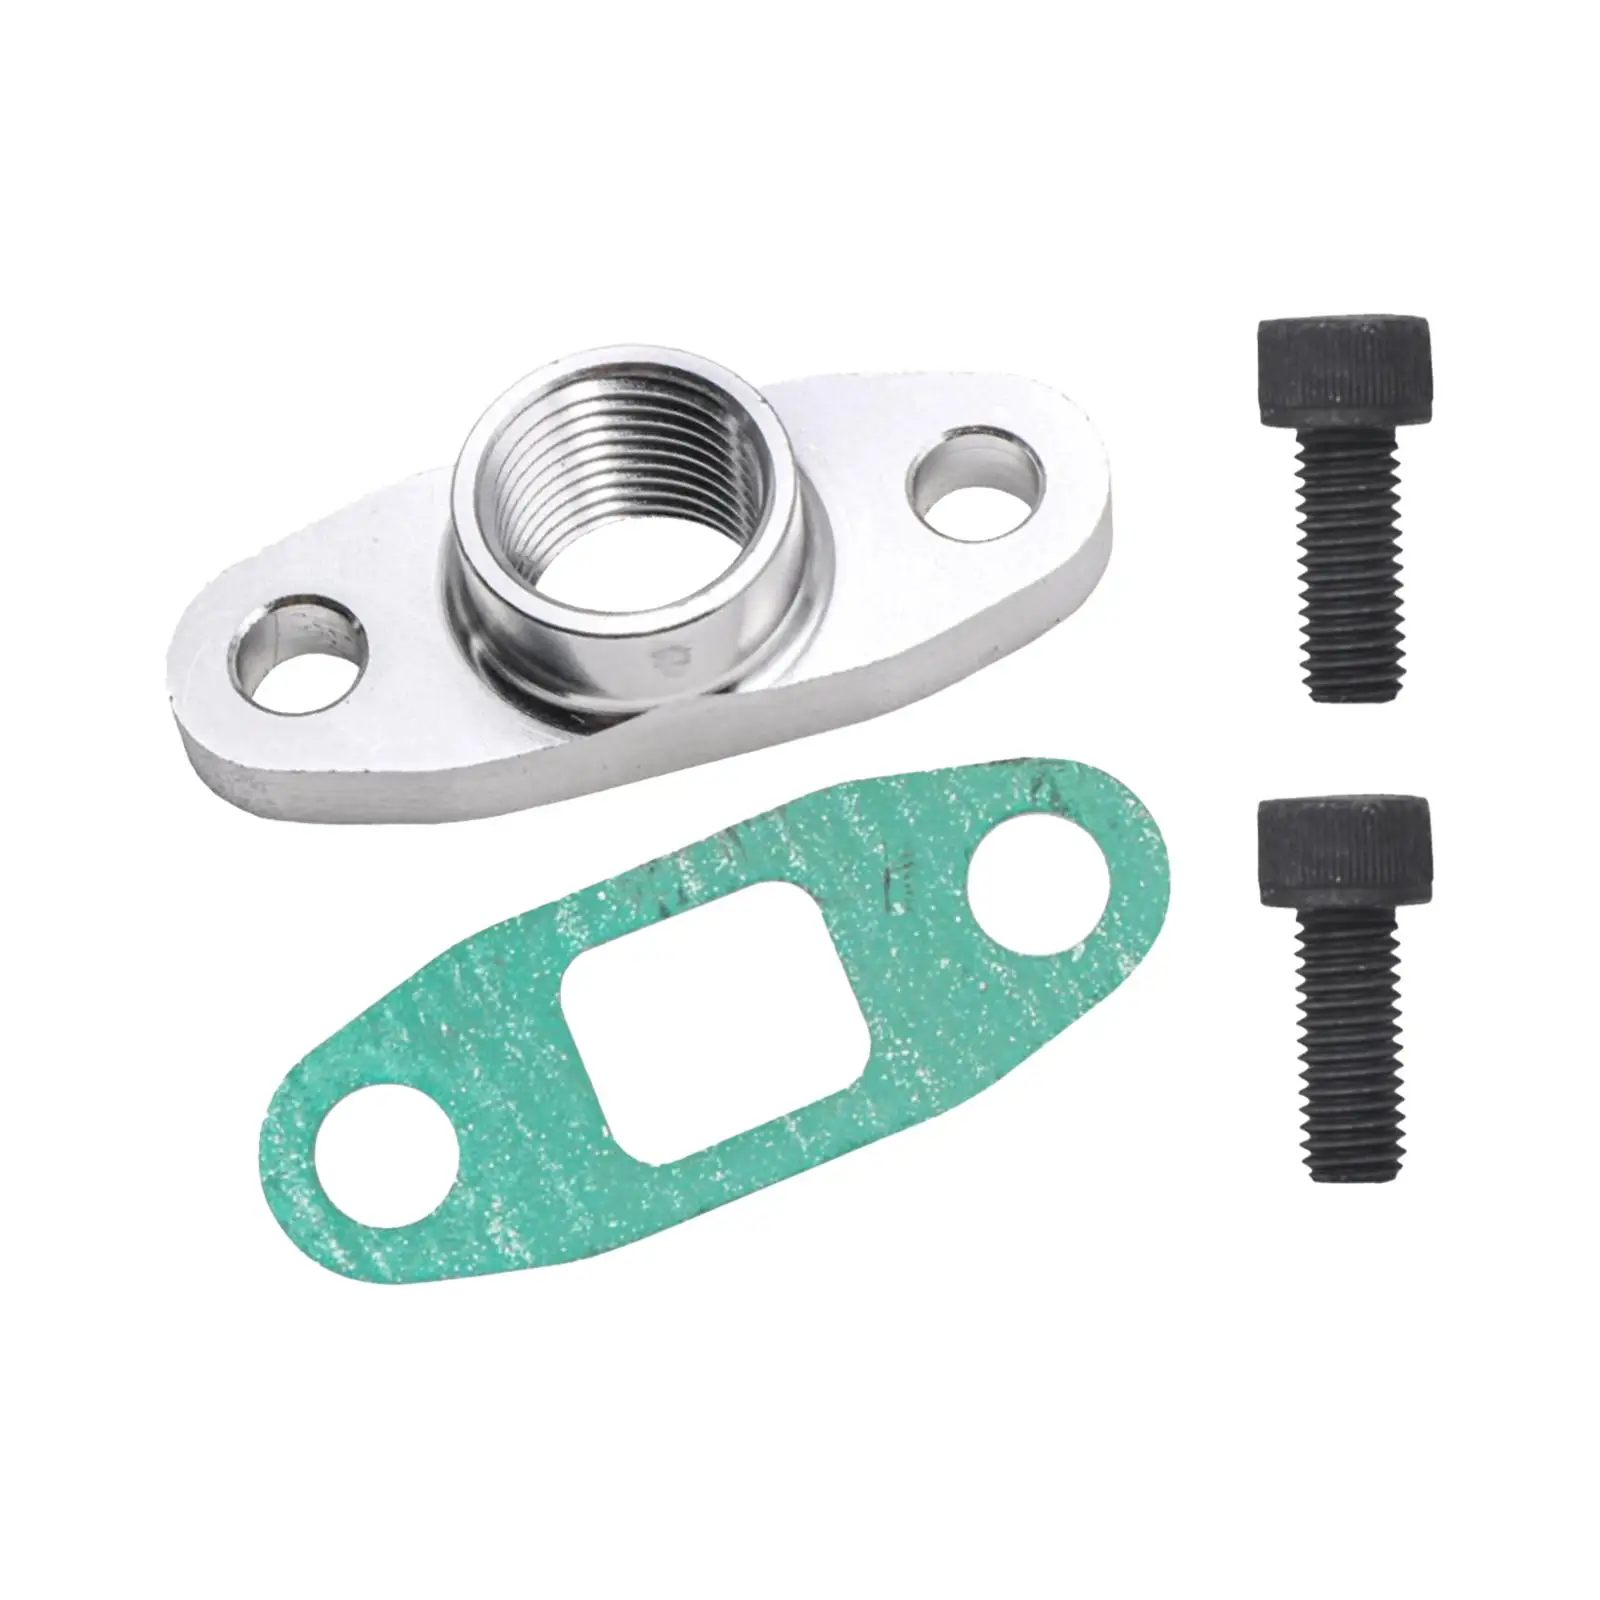 Oil Drain Outlet Flange Gasket Adapter Set Car Accessories with Gasket AN10 Fitting 1/2